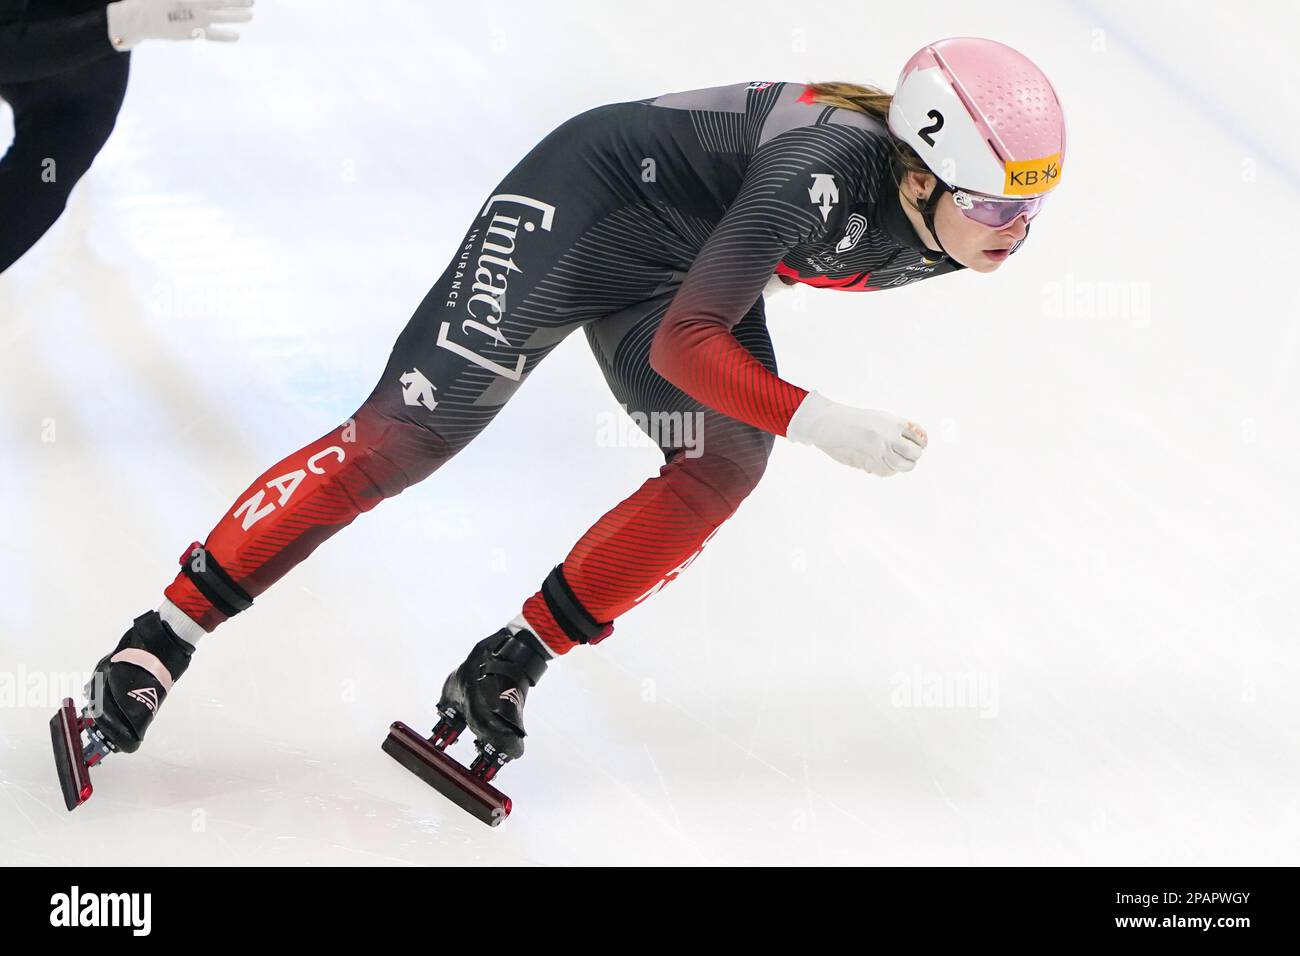 SEOUL, KOREA - MARCH 12: Kim Boutin of Canada competing on the Women's 1000m during the ISU World Short Track Speed Skating Championships at Mokdong Ice Rink on March 12, 2023 in Seoul, Korea (Photo by Andre Weening/Orange Pictures) Stock Photo